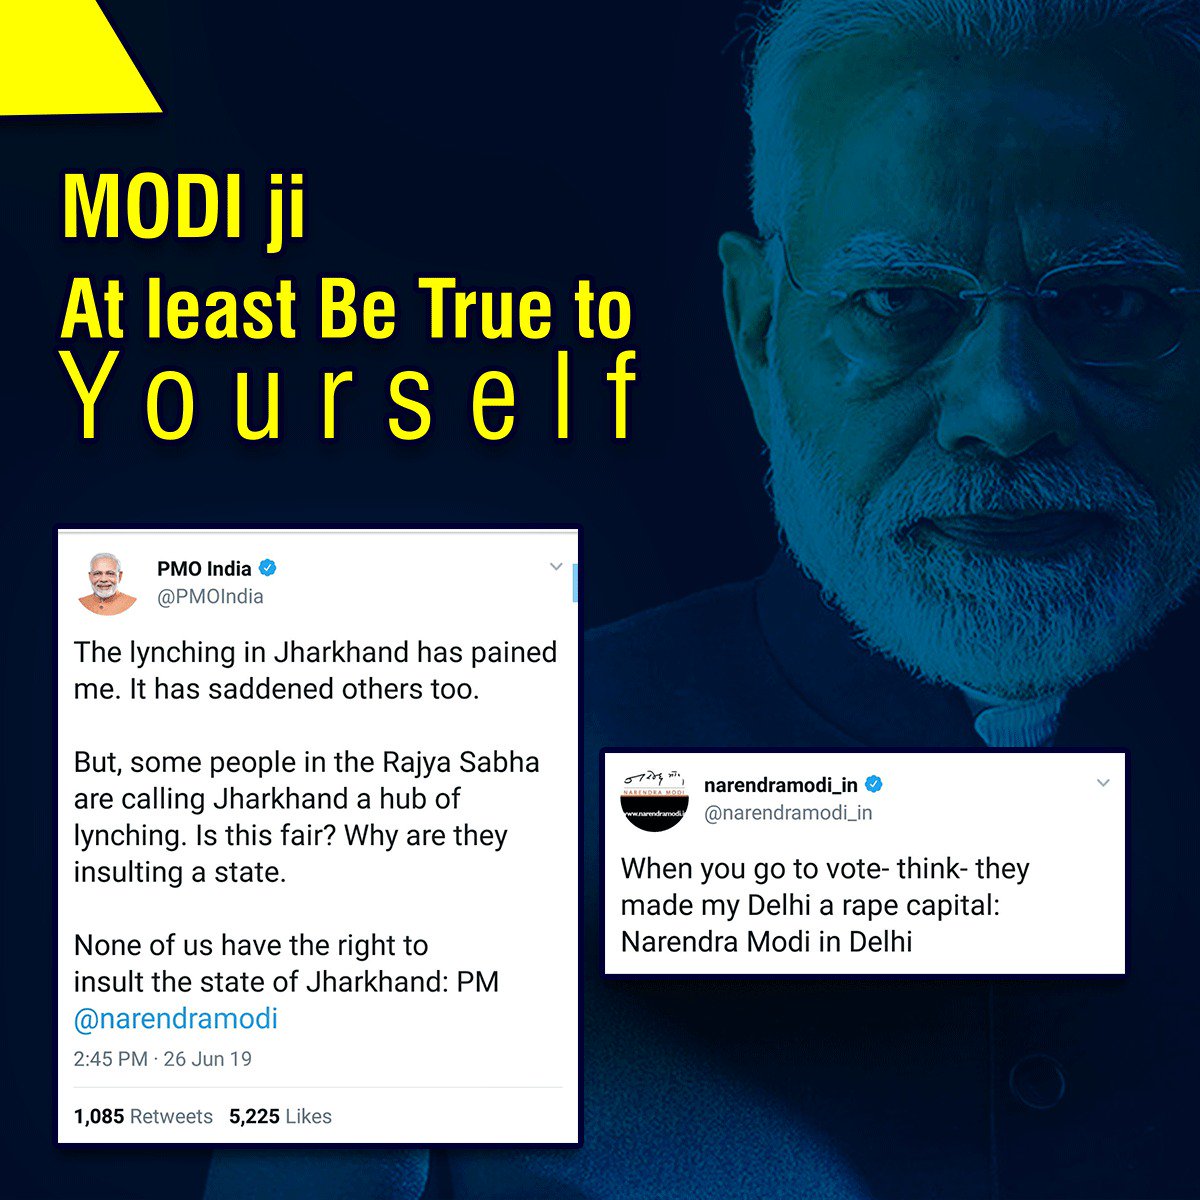 Modi ji once termed Delhi as the 'Rape Capital' of India while today in Parliament he was playing a victim card when questions were raised on deteriorating law and order situation in Jharkhand.
Modi ji at least try being true to yourself.
#JharkhandLynching